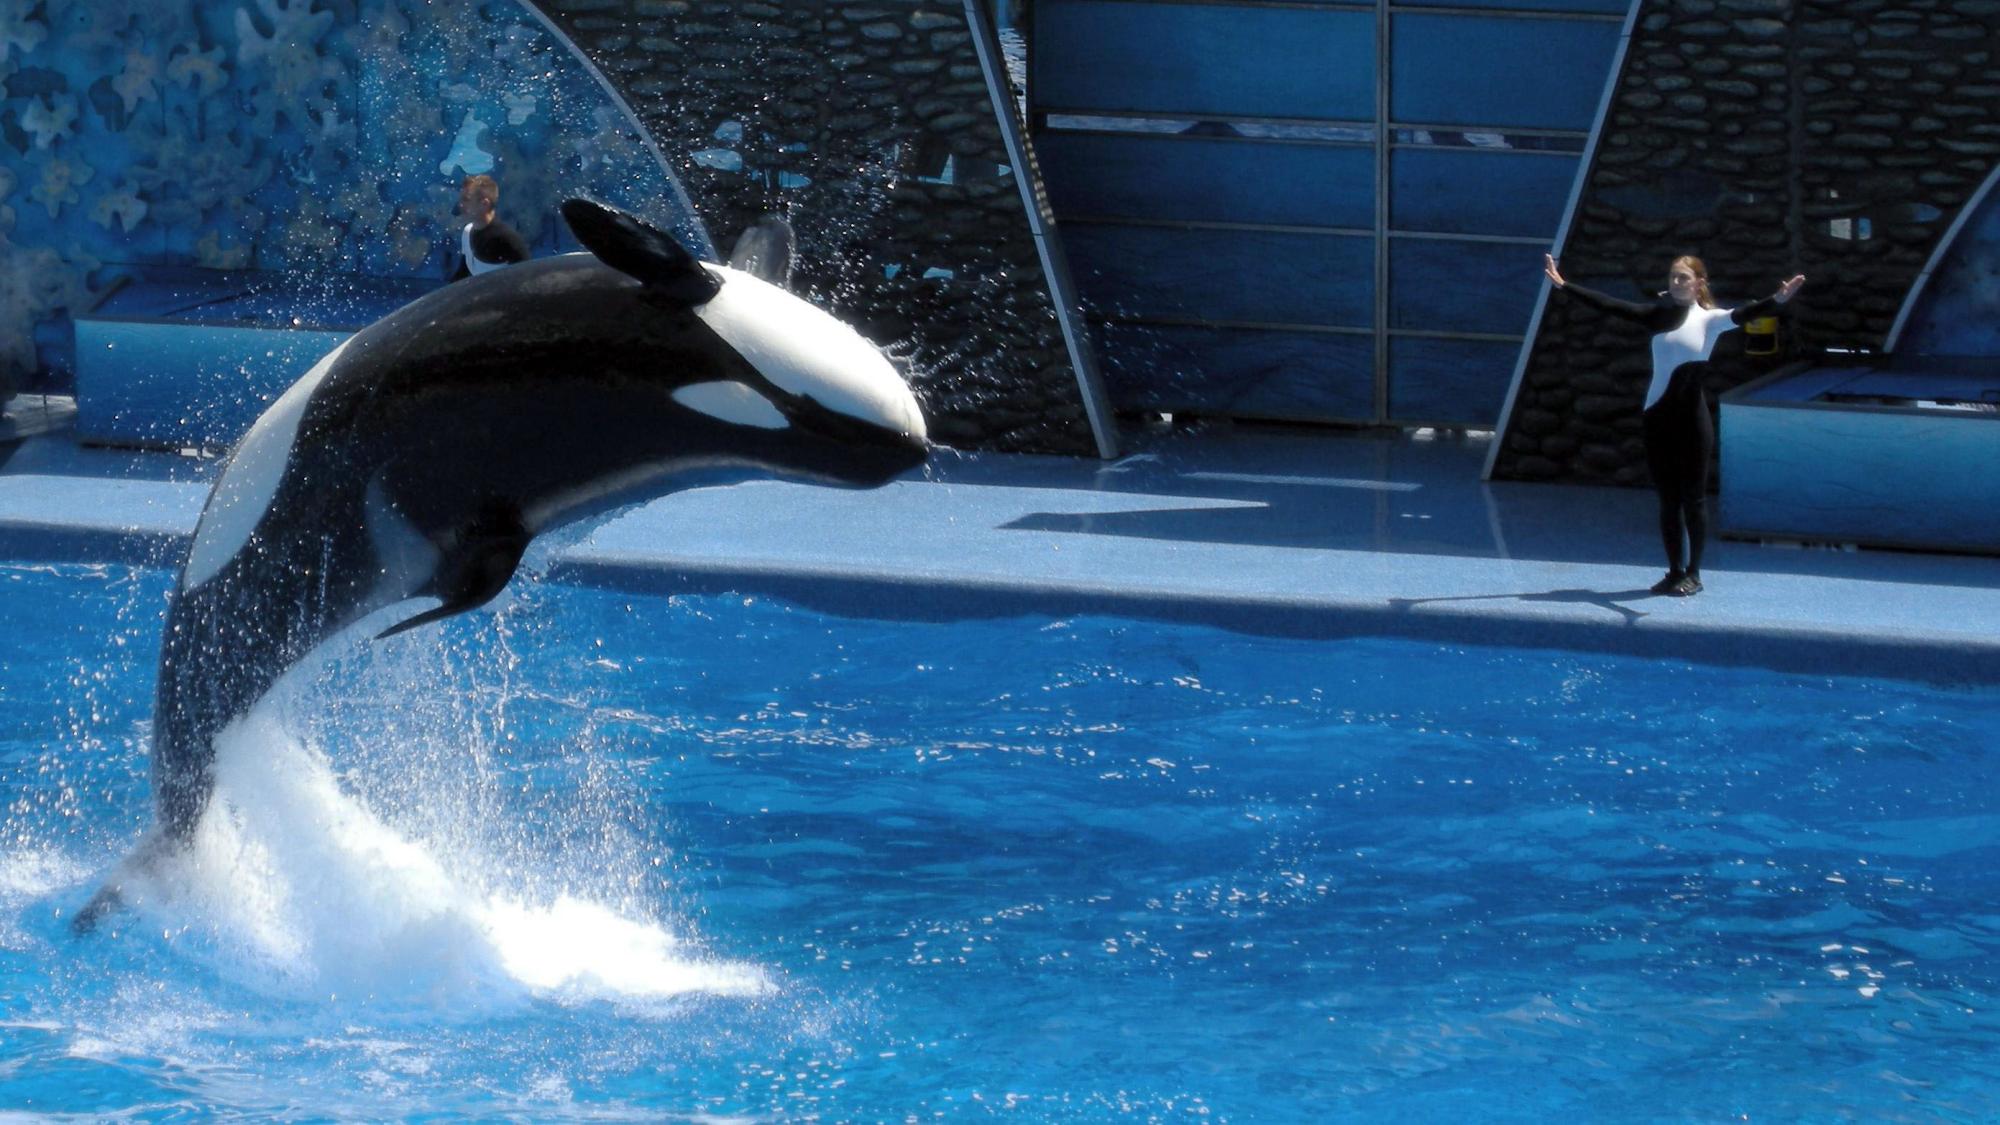 an orca jumping out of the water with another person